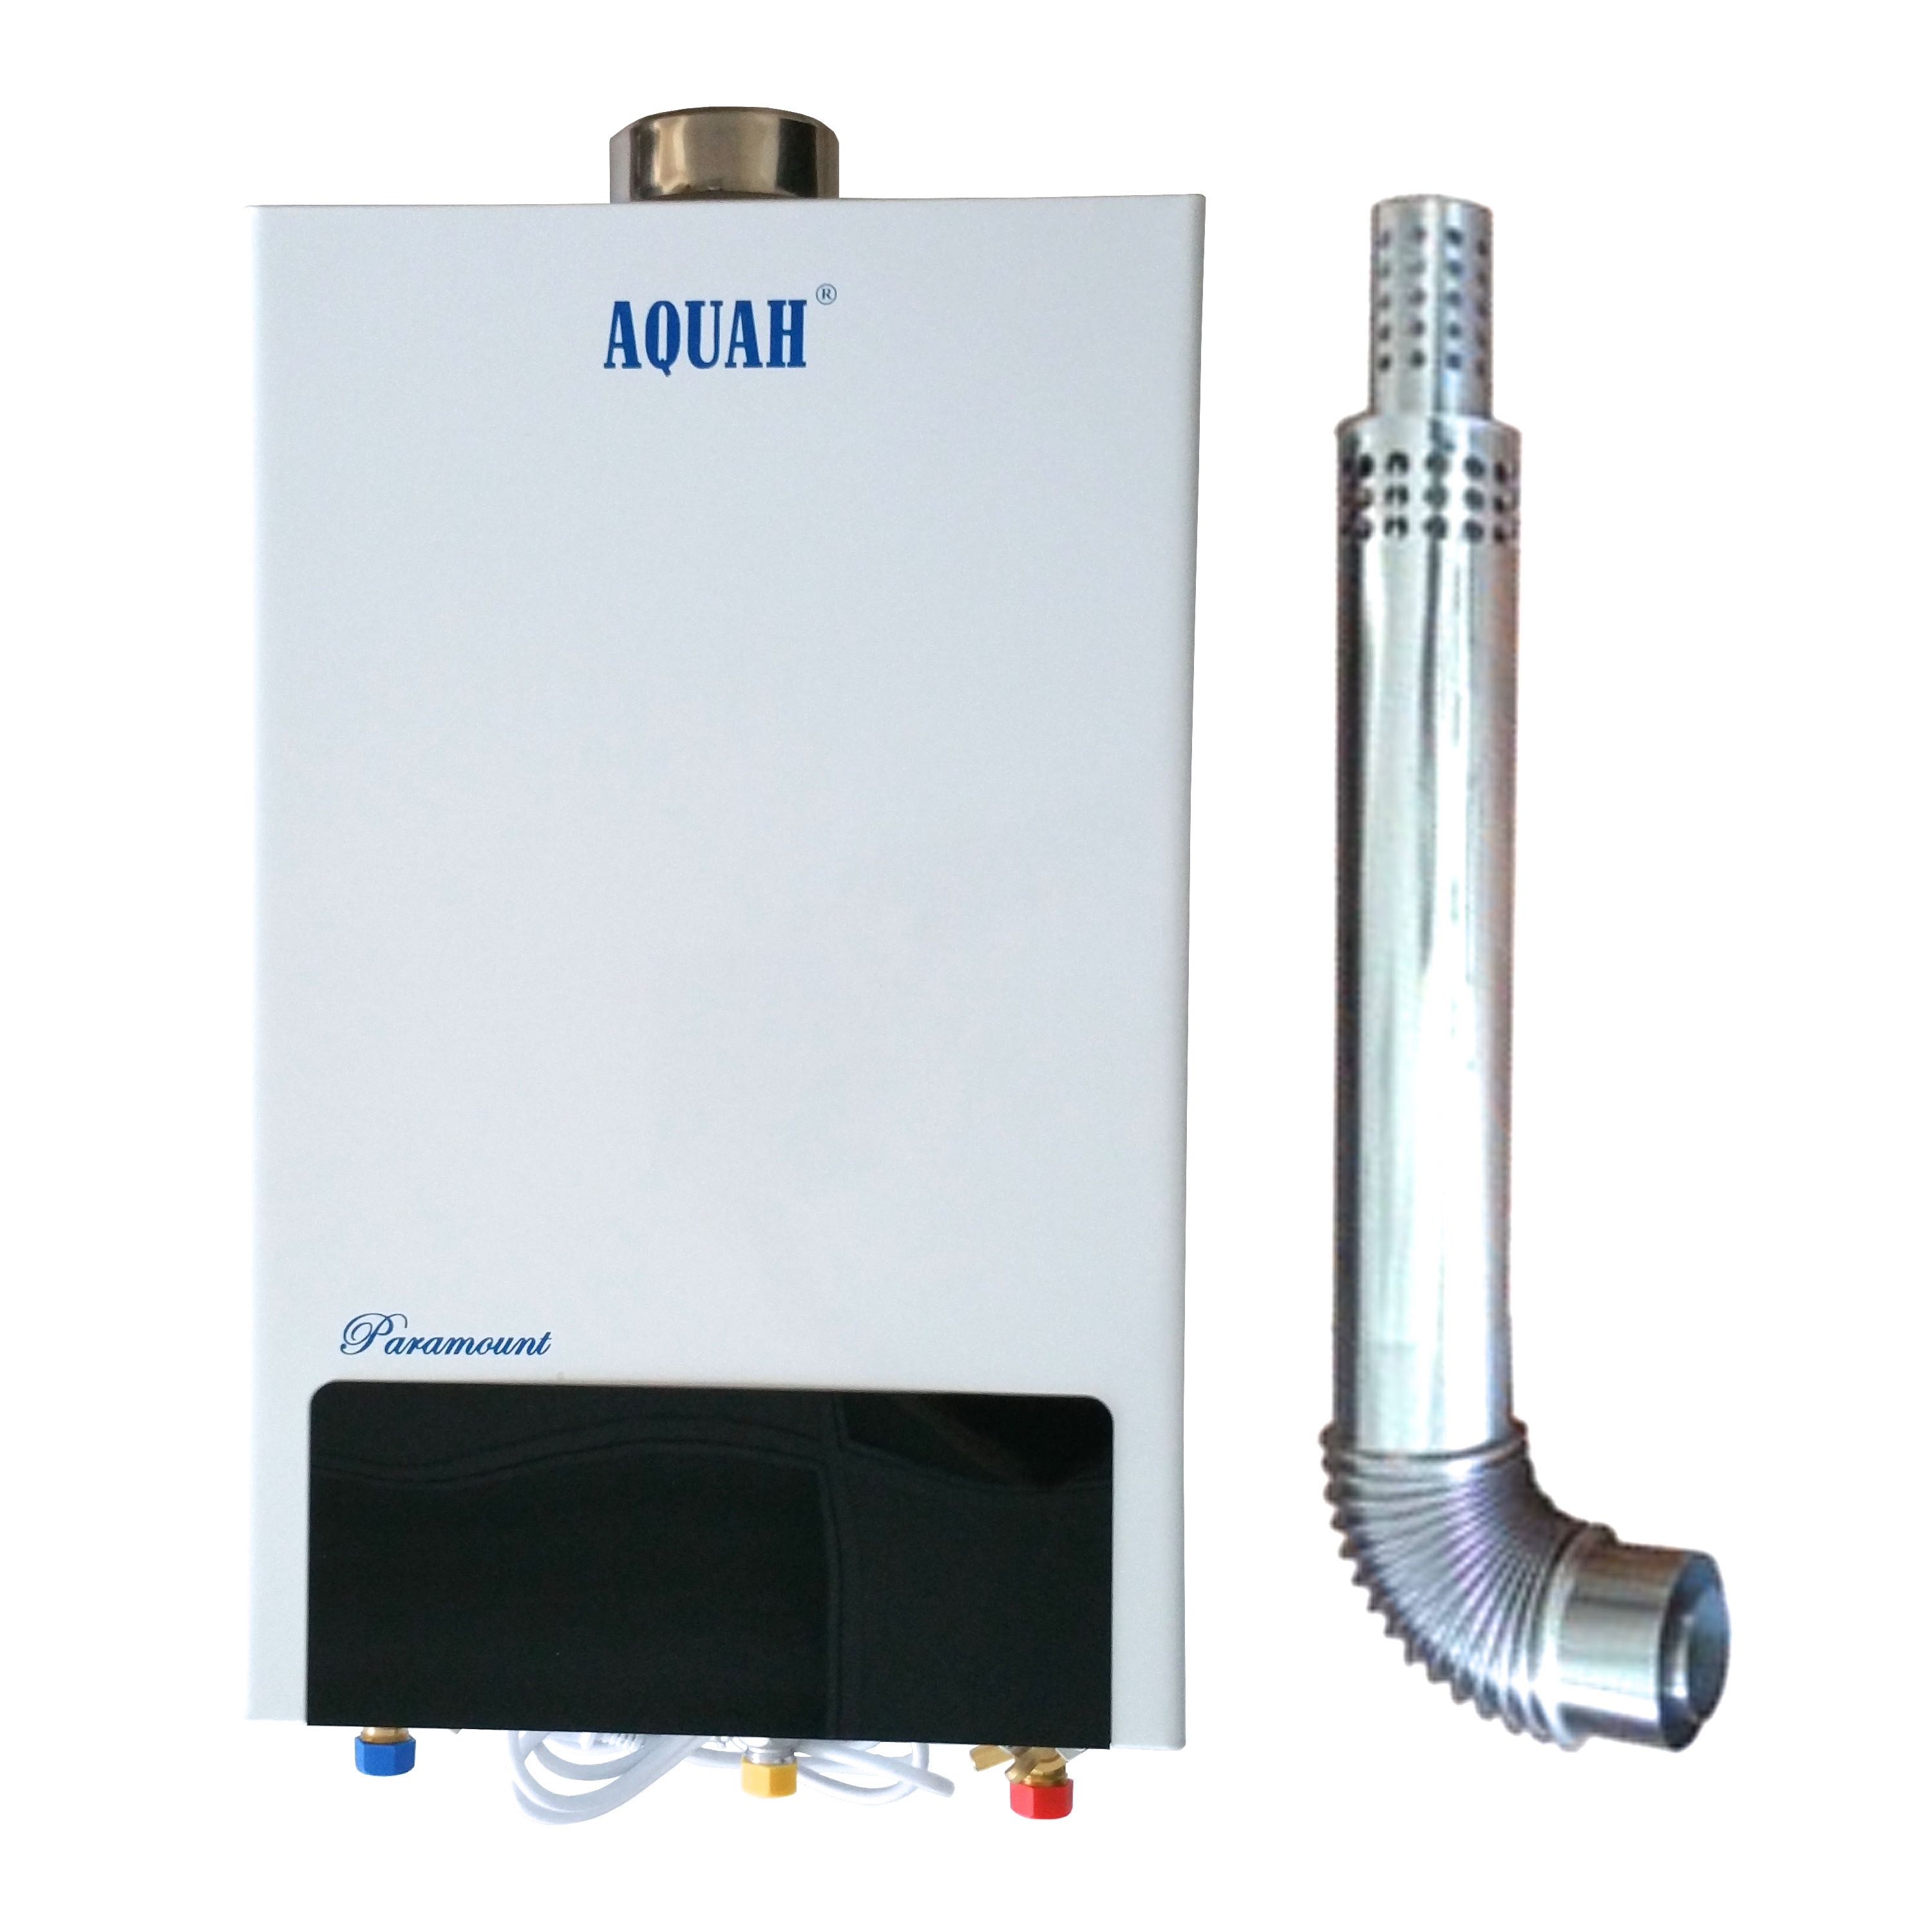 AQUAH PARAMOUNT DIRECT VENT PROPANE GAS TANKLESS WATER HEATER